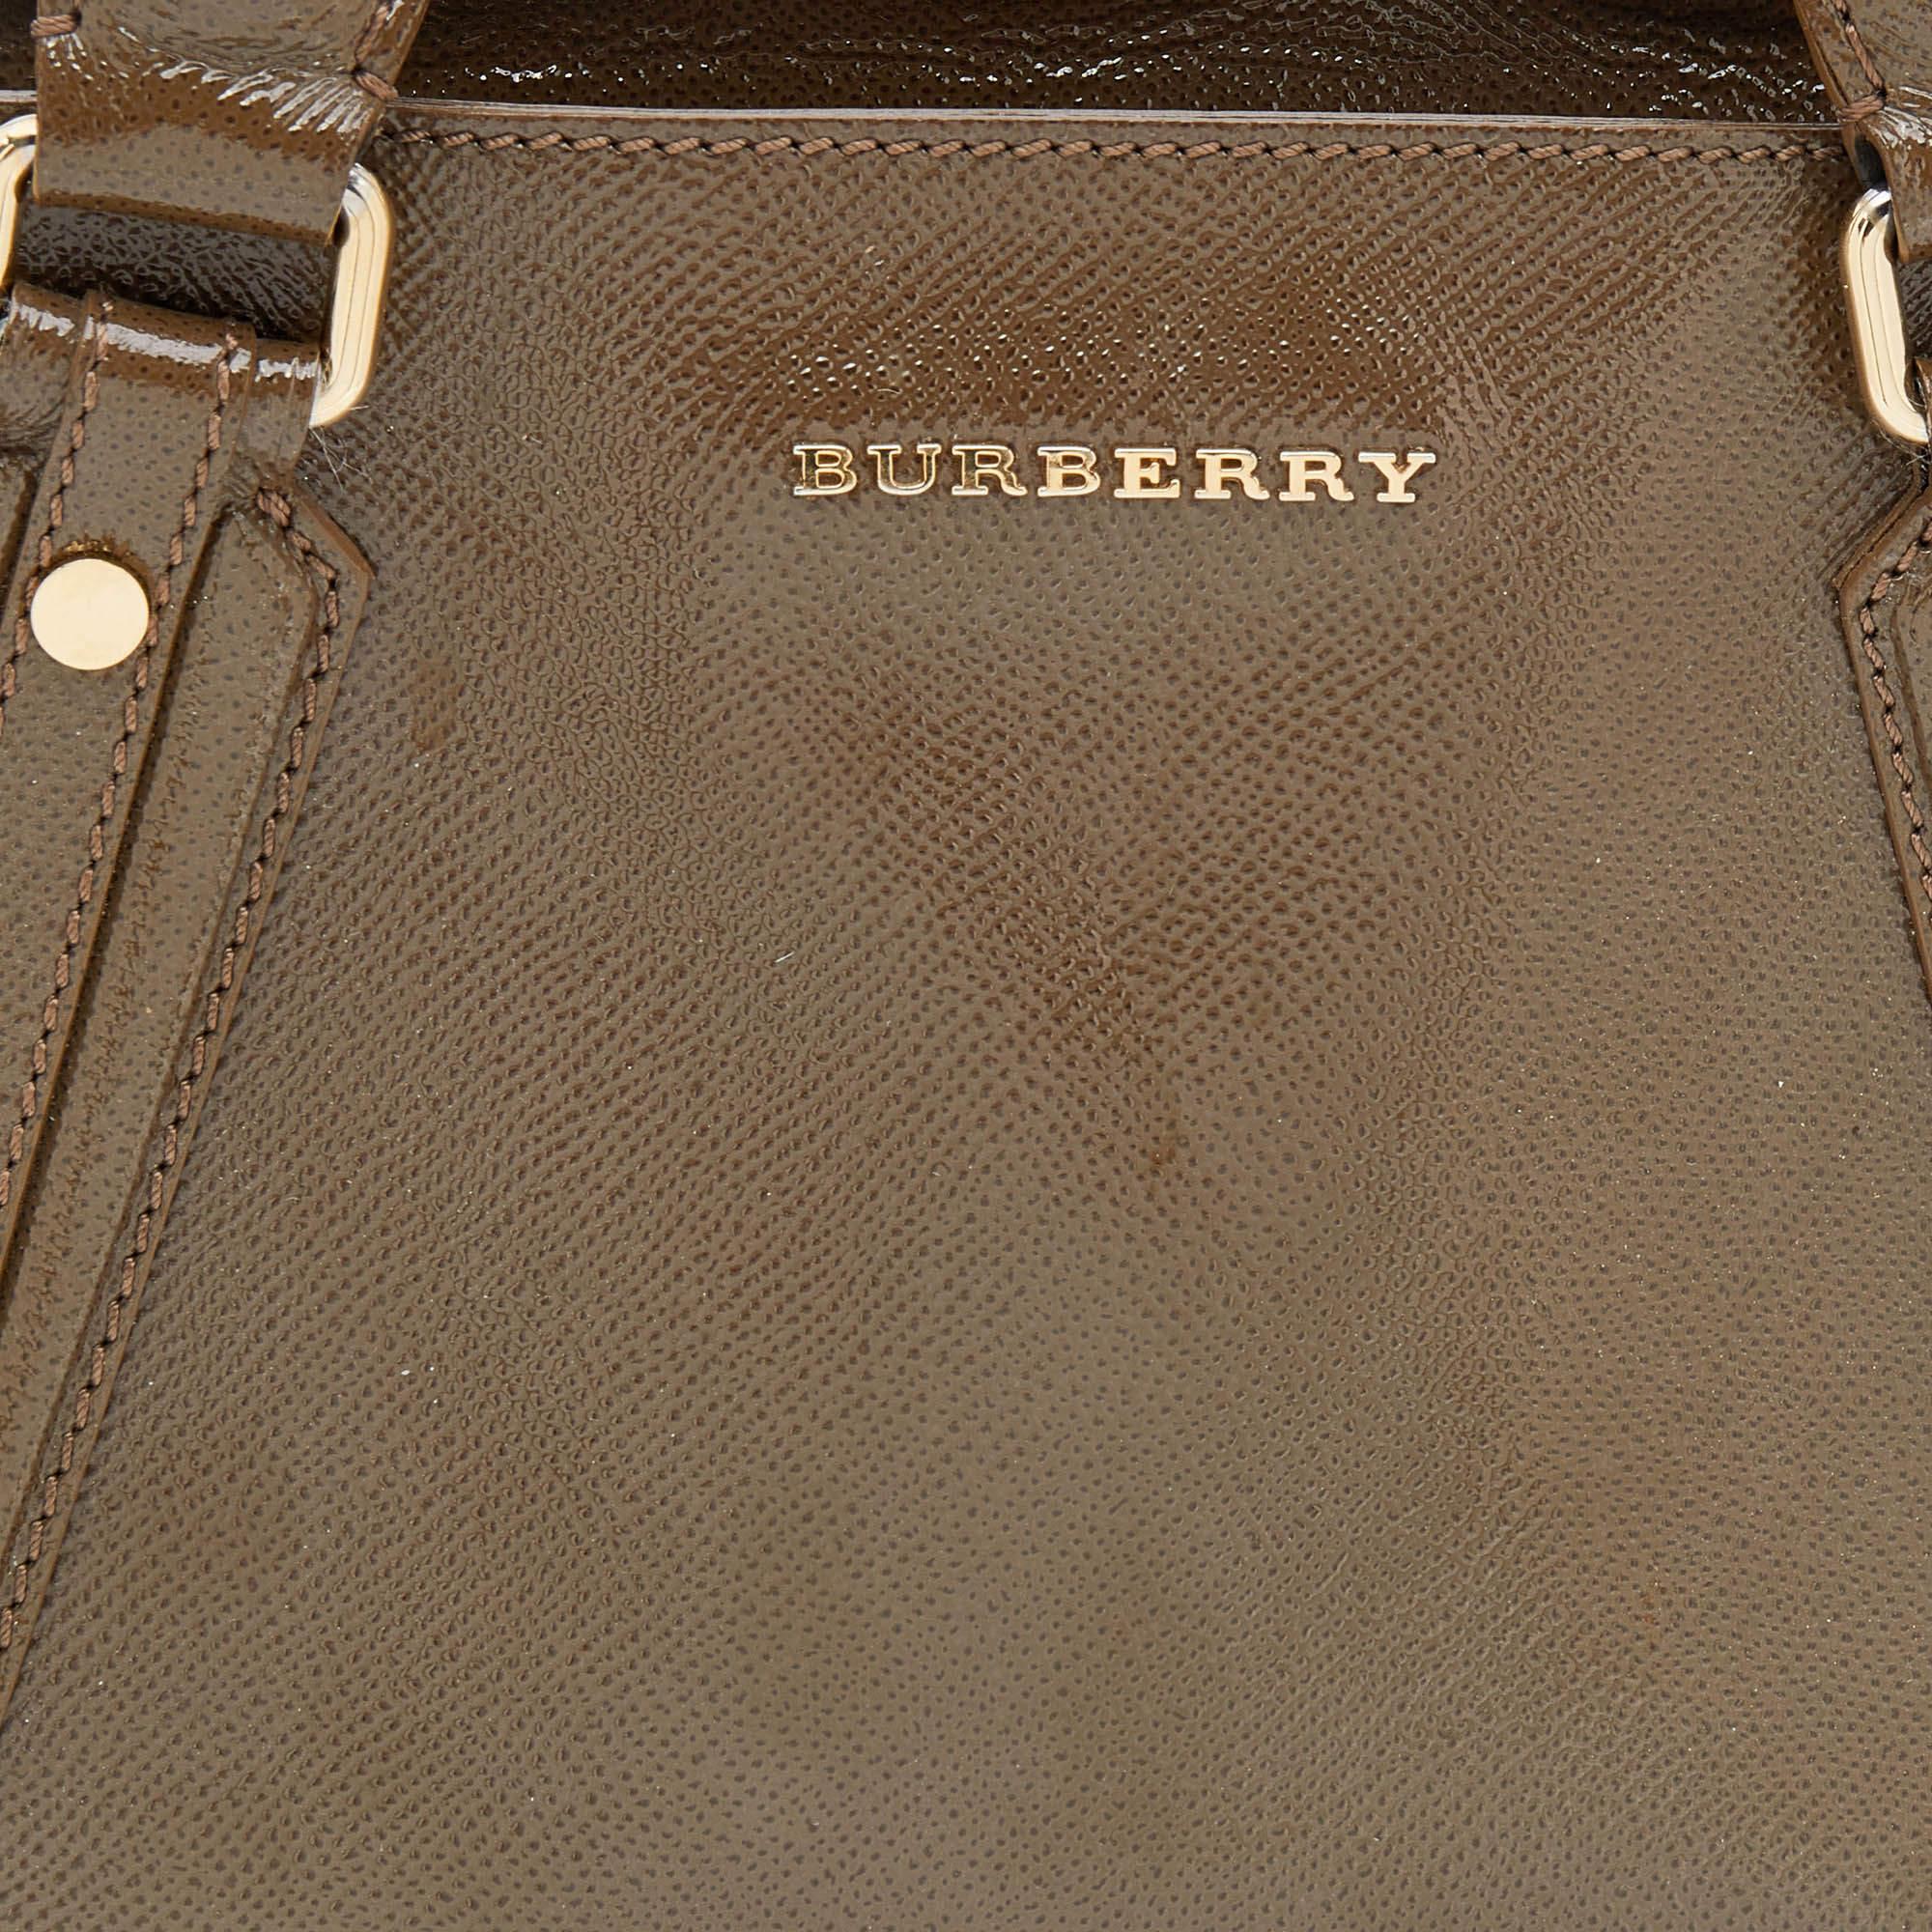 Burberry Brown Patent Leather Somerford Convertible Tote For Sale 5